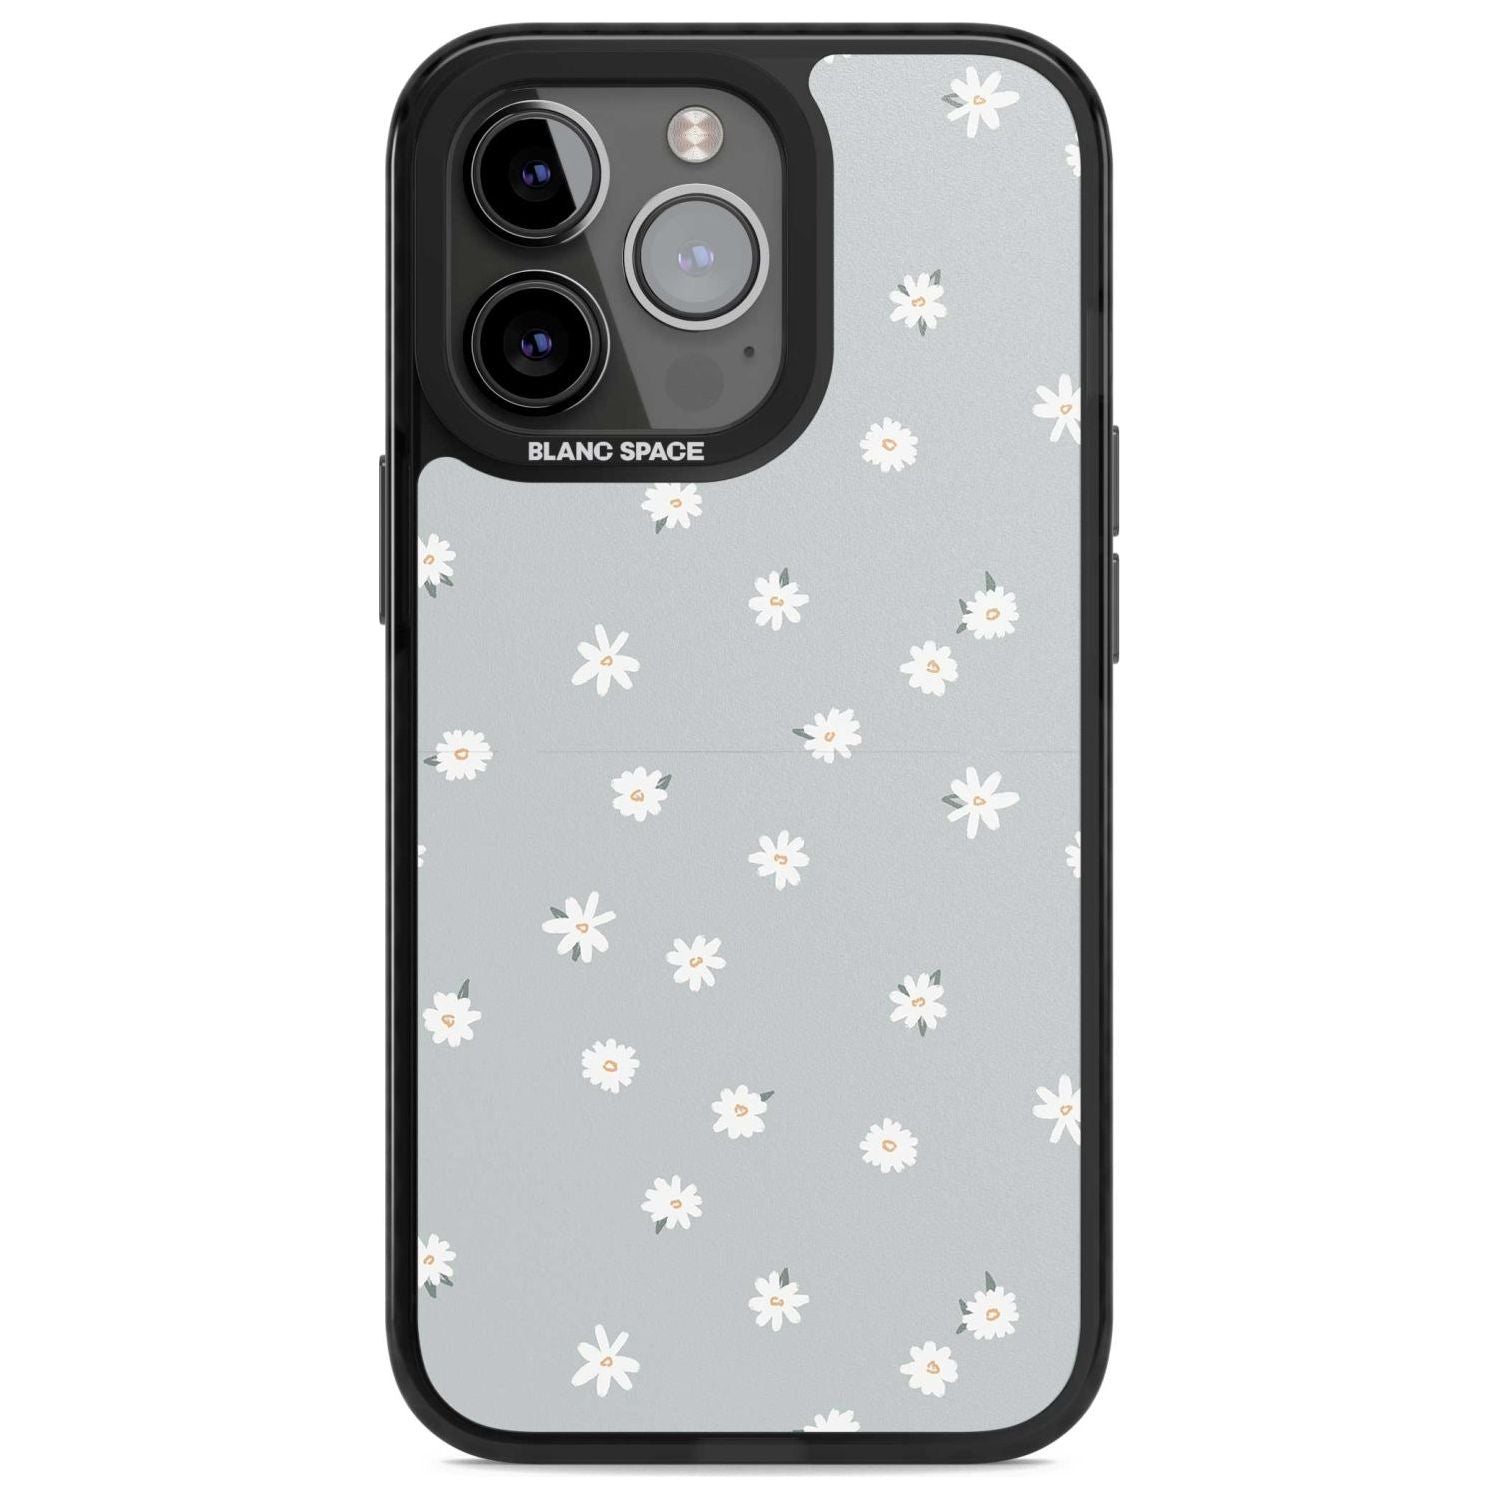 Painted Daisy Blue-Grey Cute Phone Case iPhone 15 Pro Max / Magsafe Black Impact Case,iPhone 15 Pro / Magsafe Black Impact Case,iPhone 14 Pro Max / Magsafe Black Impact Case,iPhone 14 Pro / Magsafe Black Impact Case,iPhone 13 Pro / Magsafe Black Impact Case Blanc Space